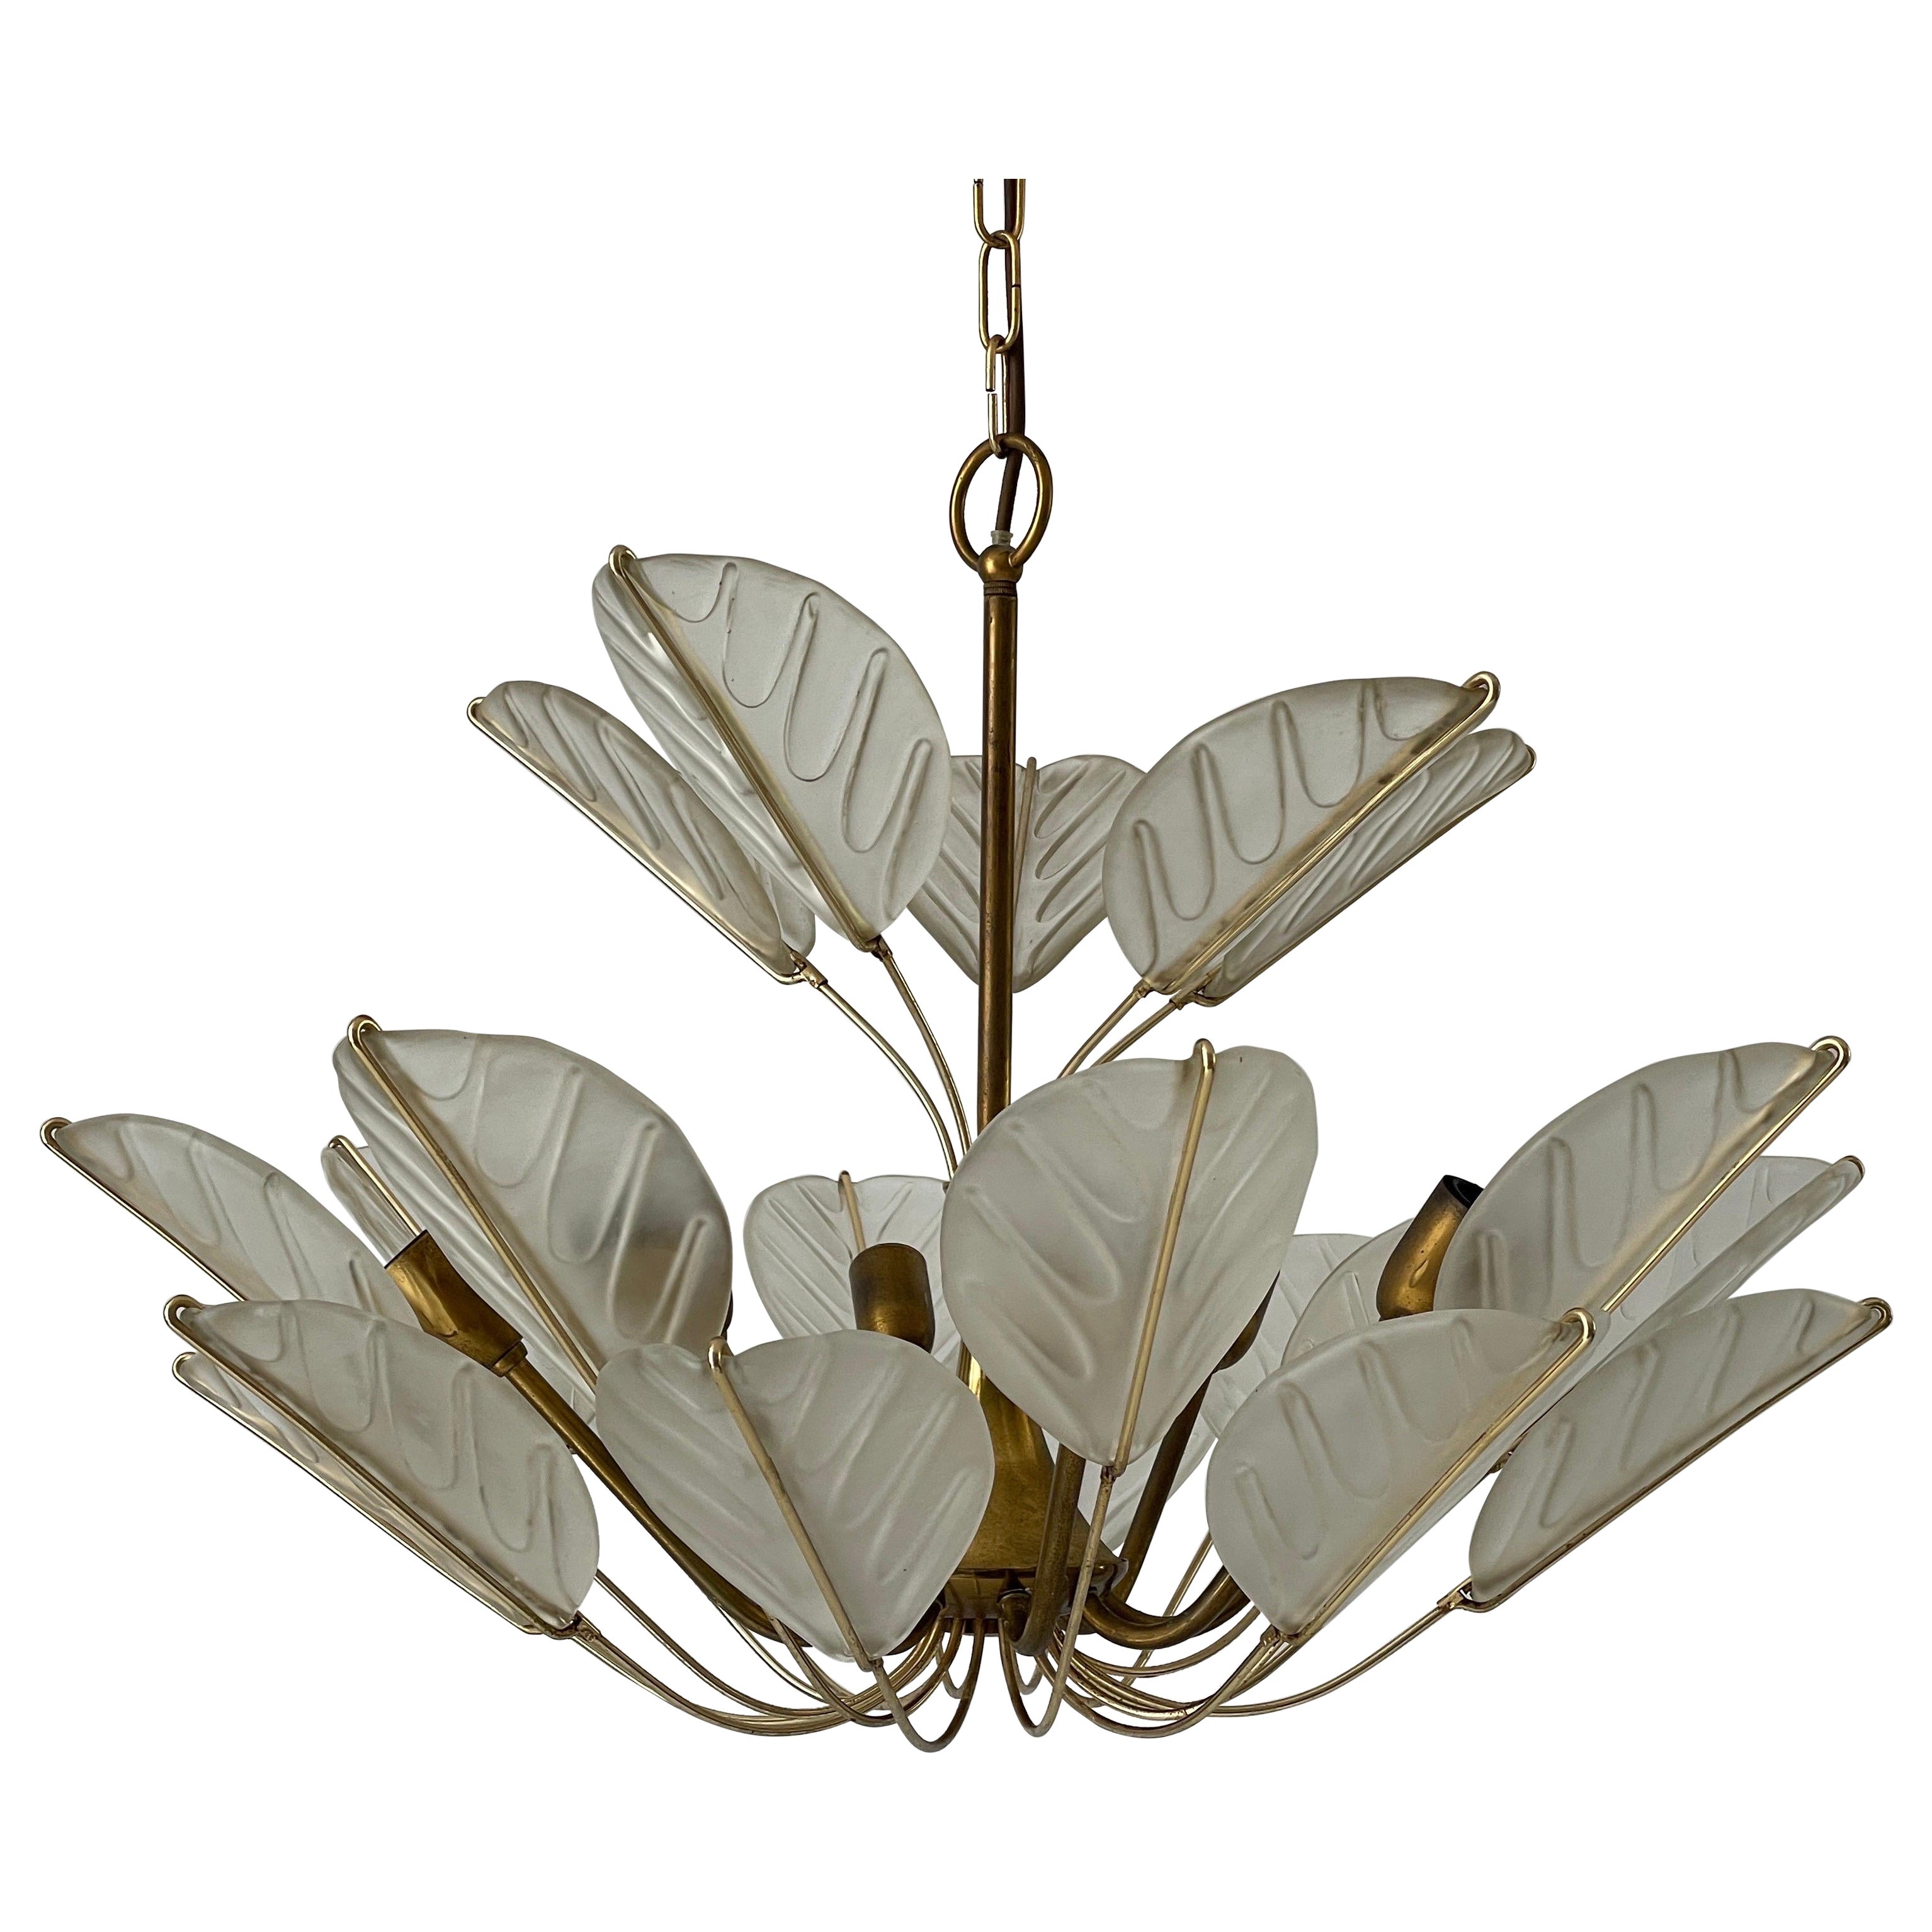 Luxurious 8-armed Brass Chandelier with Crystal Glass Leaves, 1960s, Germany